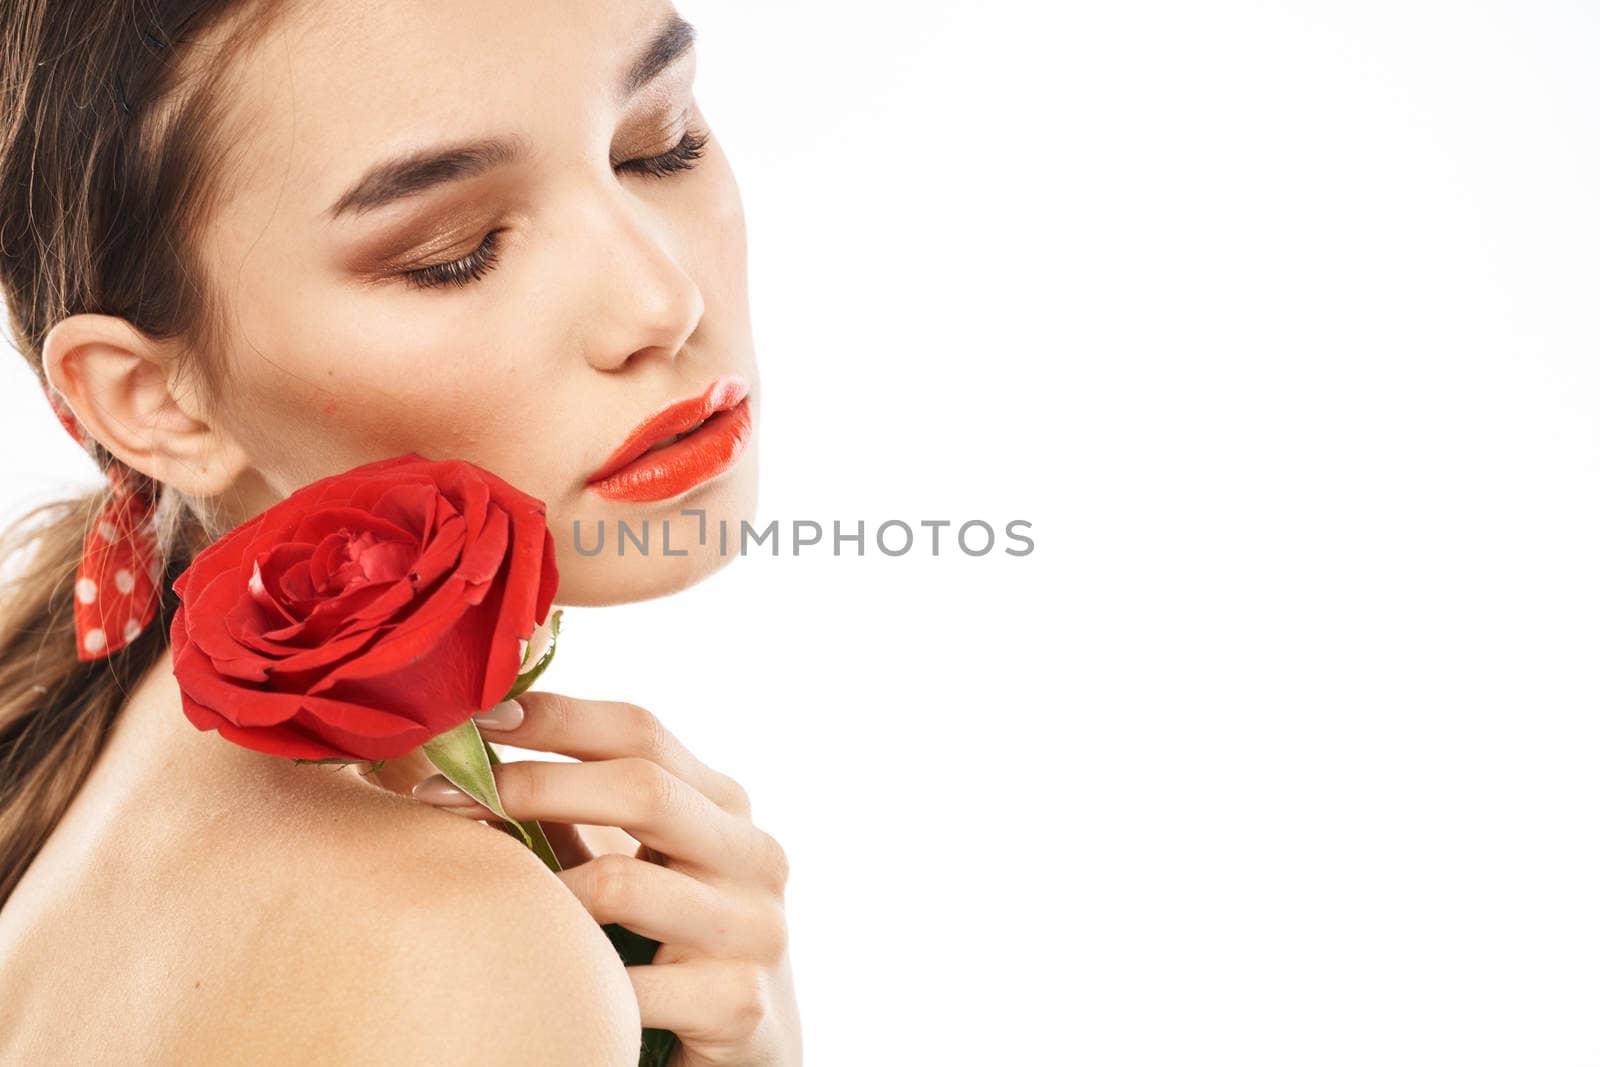 Beautiful woman with red rose near face makeup naked shoulders portrait by SHOTPRIME